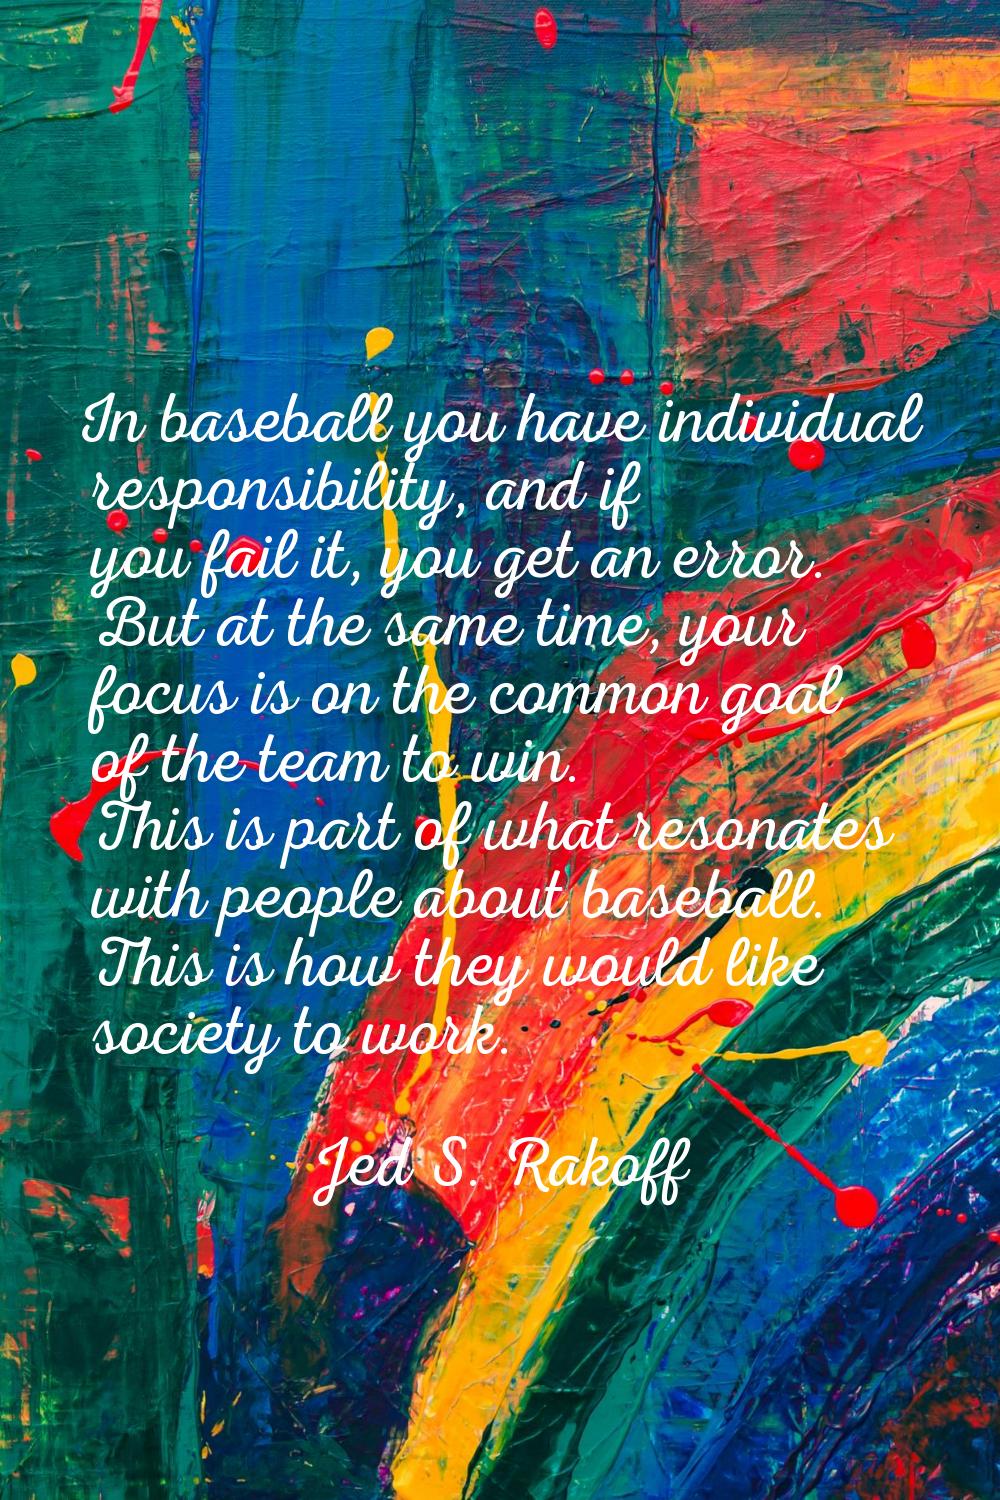 In baseball you have individual responsibility, and if you fail it, you get an error. But at the sa